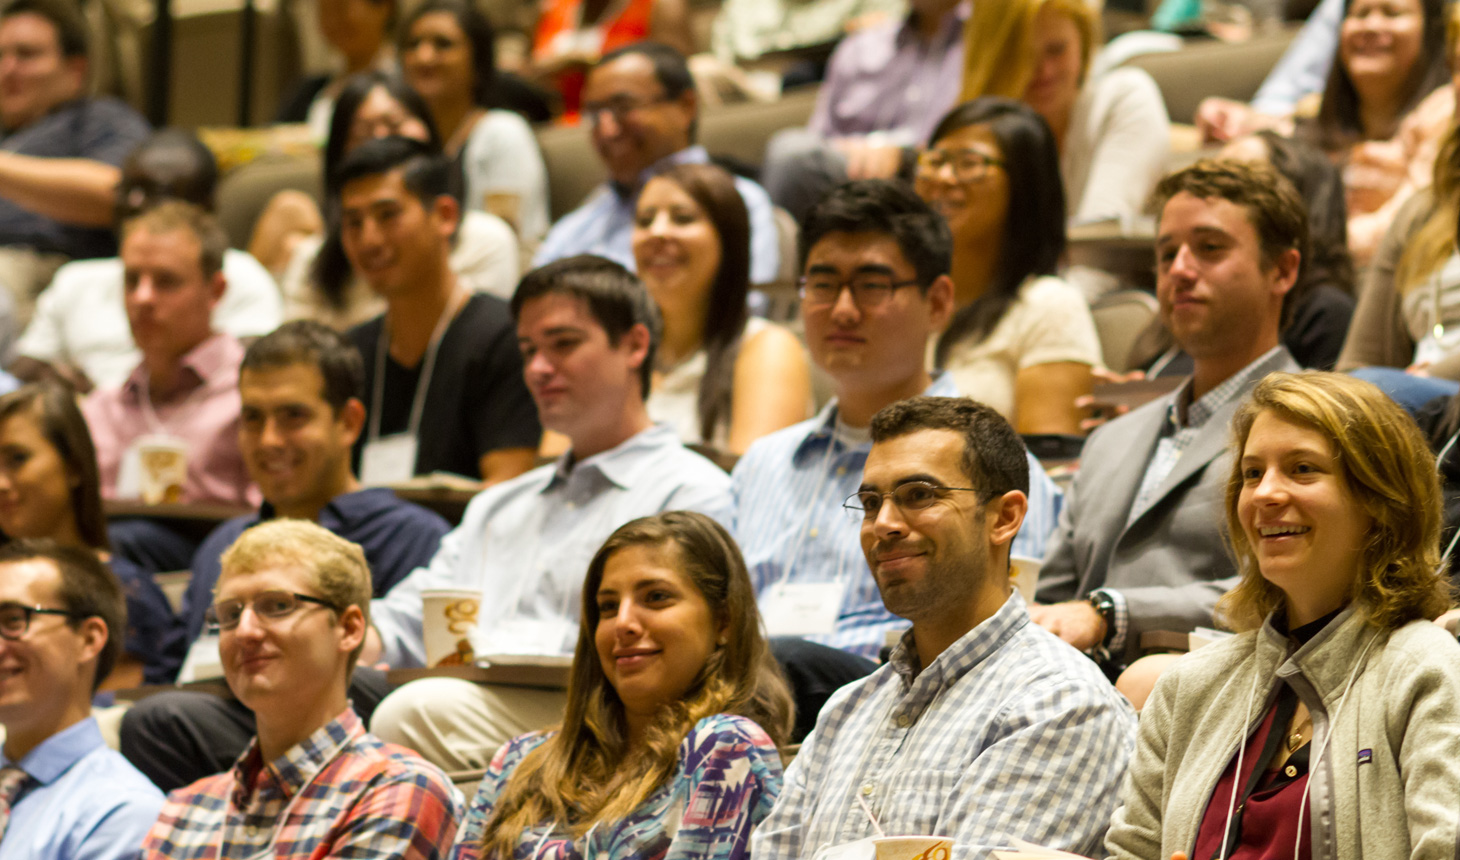 Members of the Geisel School of Medicine Class of 2018 at their first day of orientation.